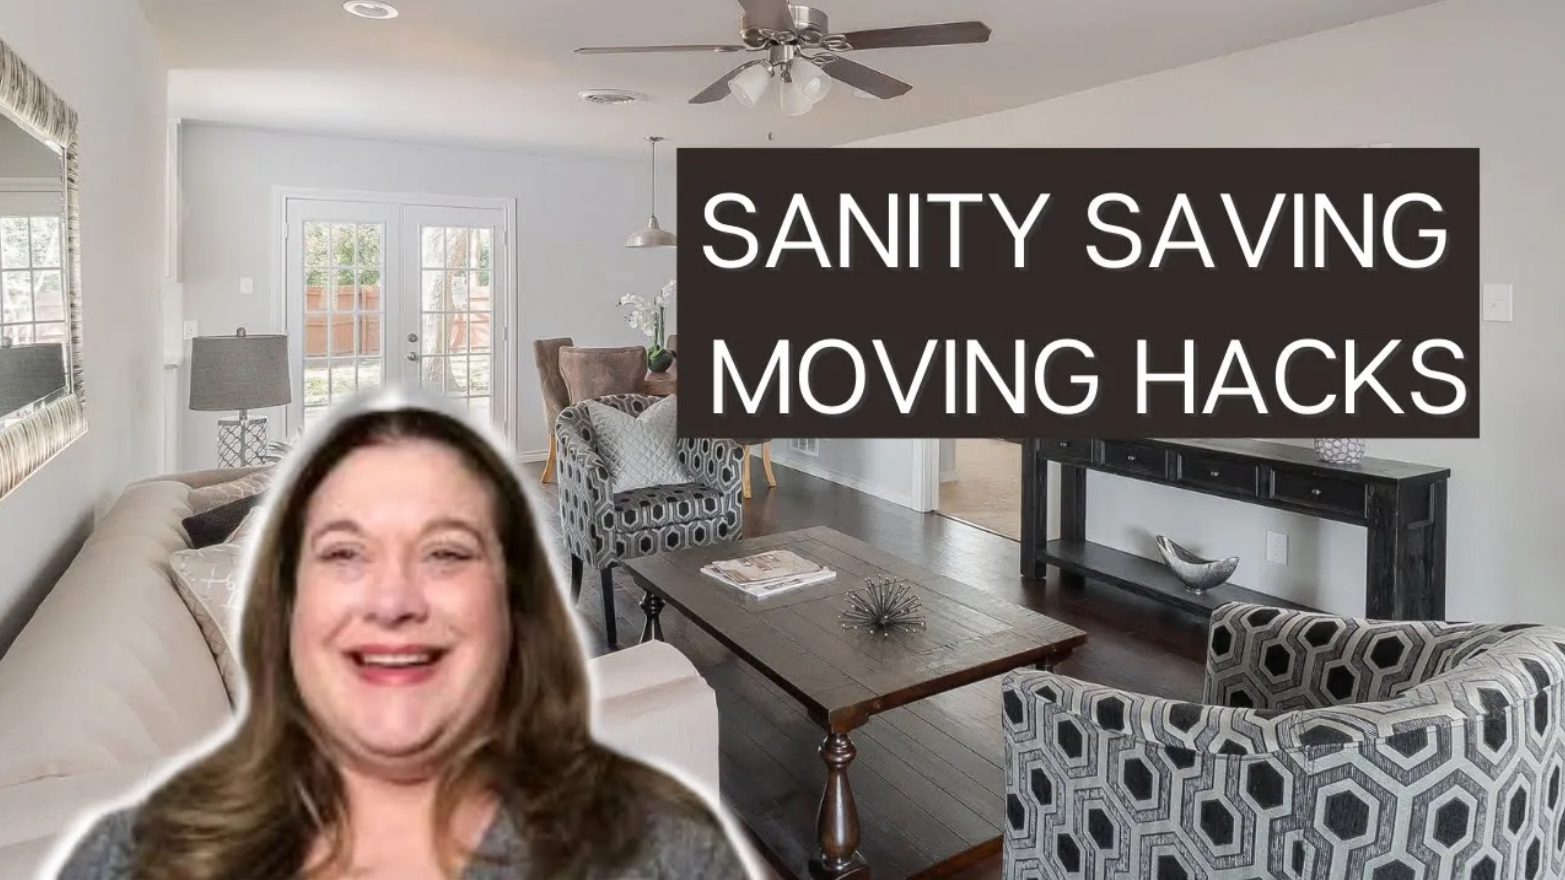 Showing Your house While Living In It - Moving hacks that will save your sanity!